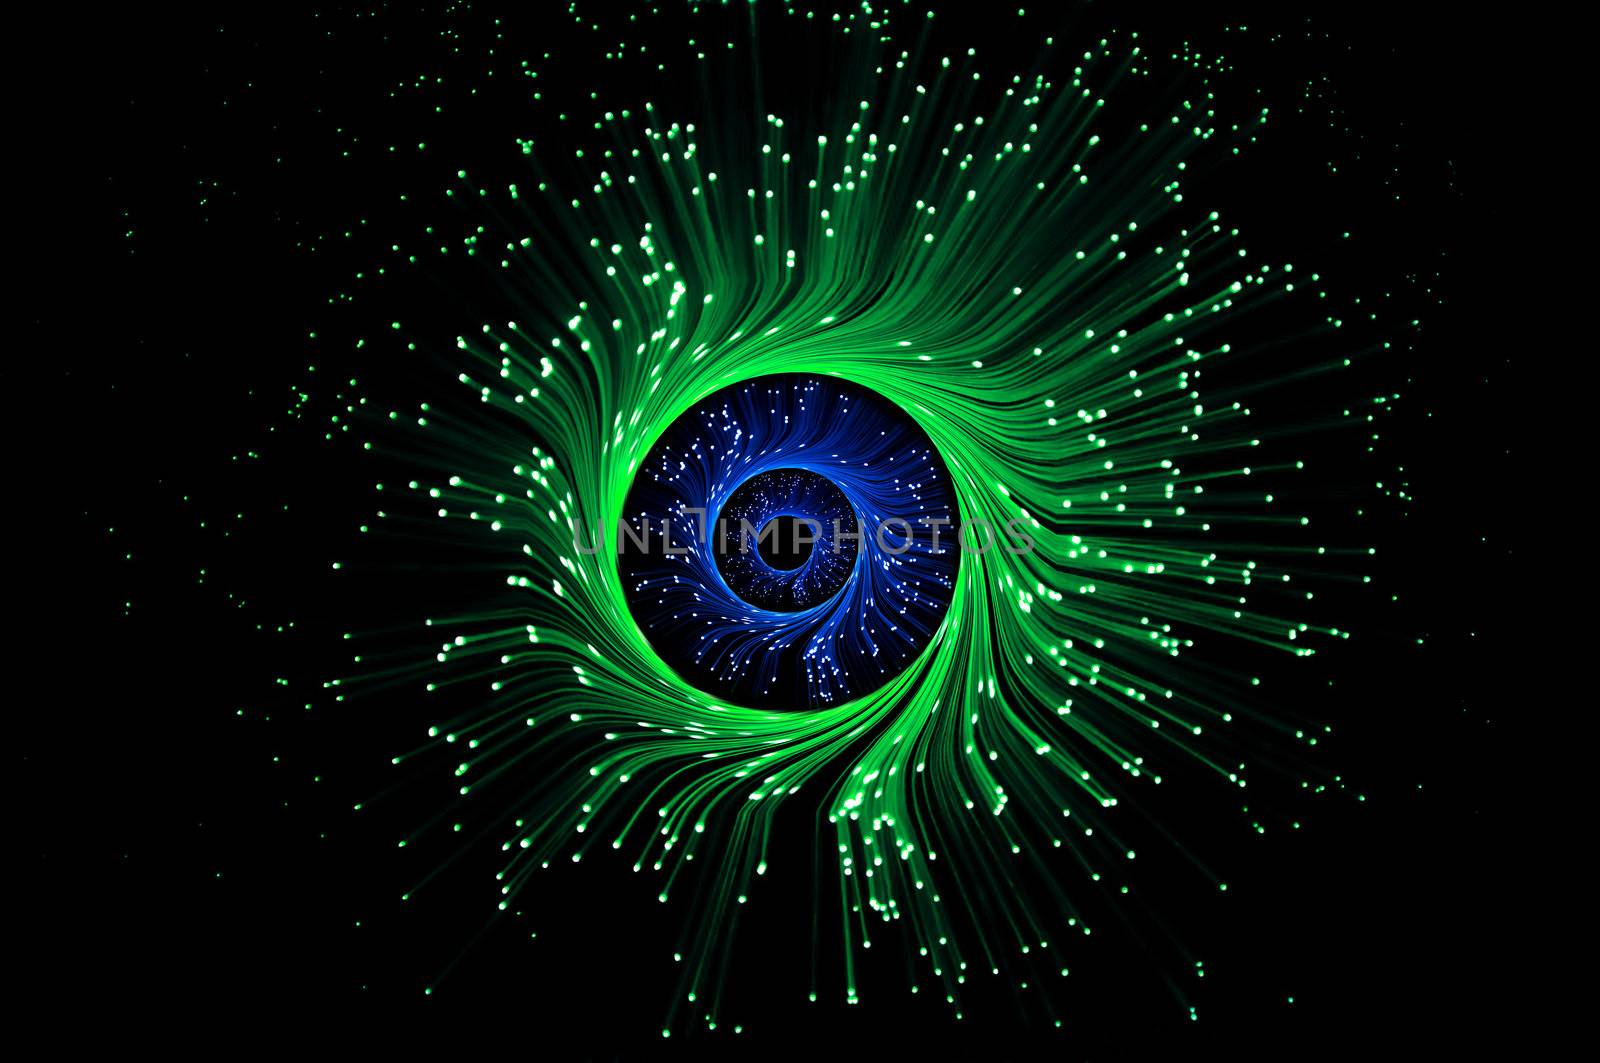 Three rings of illuminated green and blue fiber optic light strands against black background